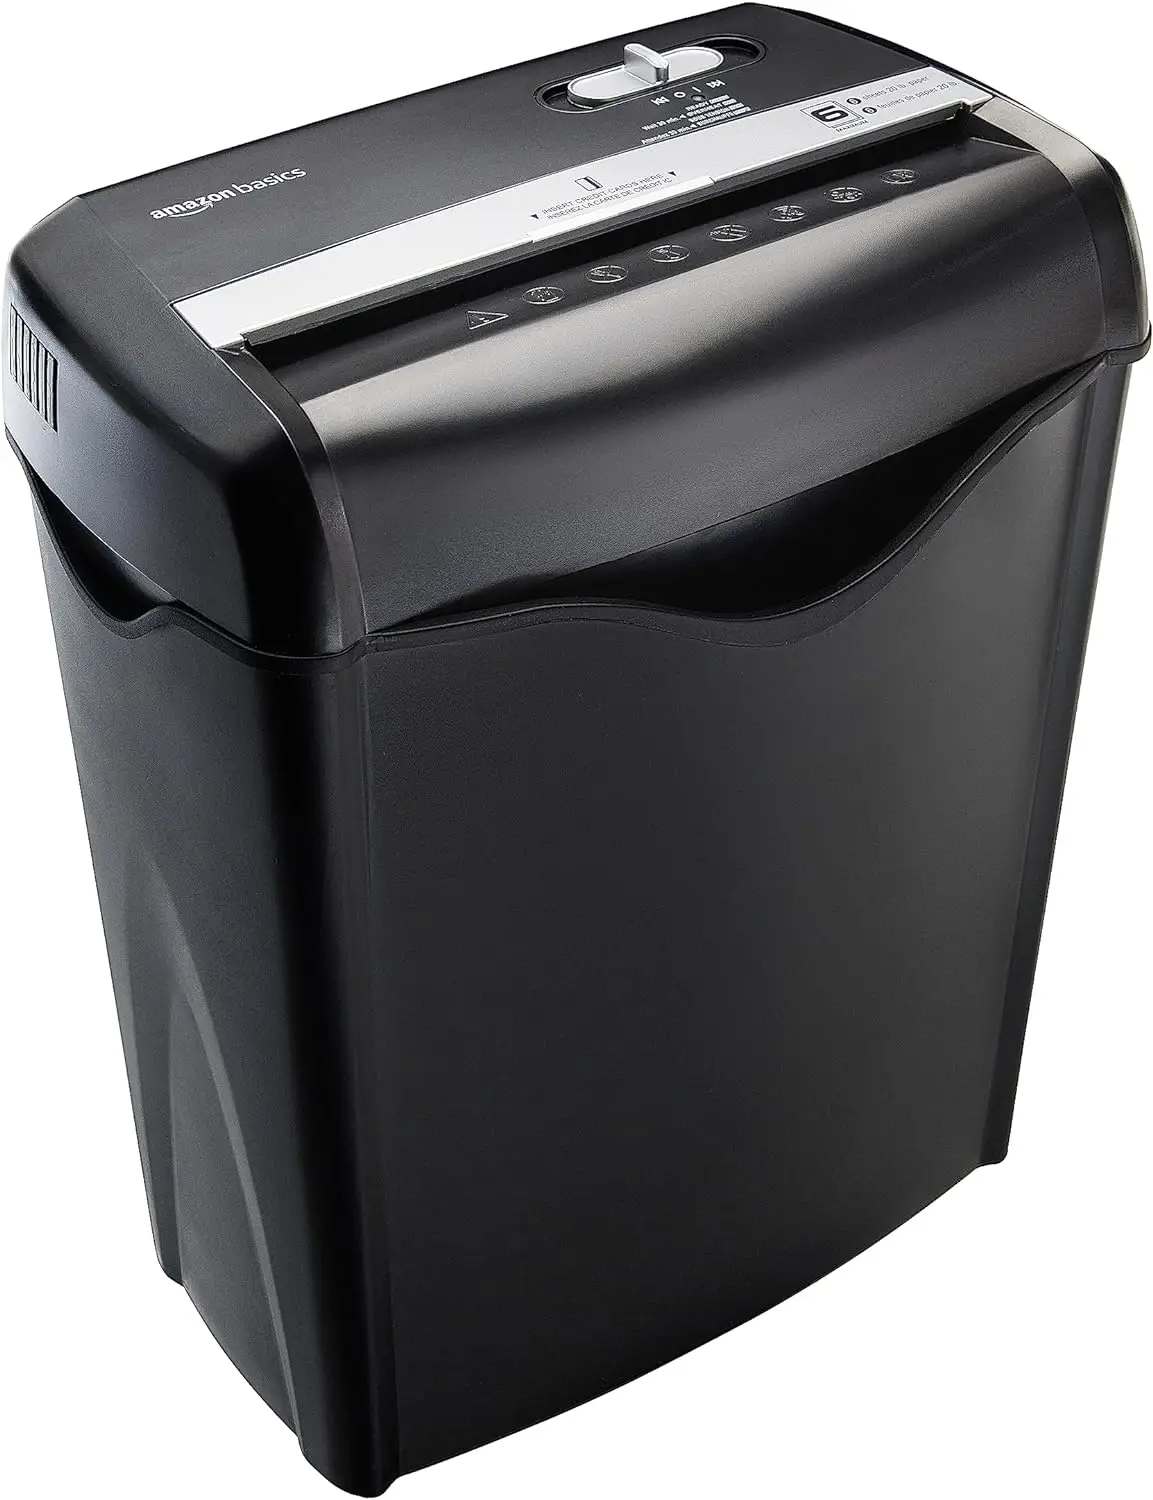 

6 Sheet Cross Cut Paper and Credit Card Home Office Shredder with 3.8 Gallon Bin, Black